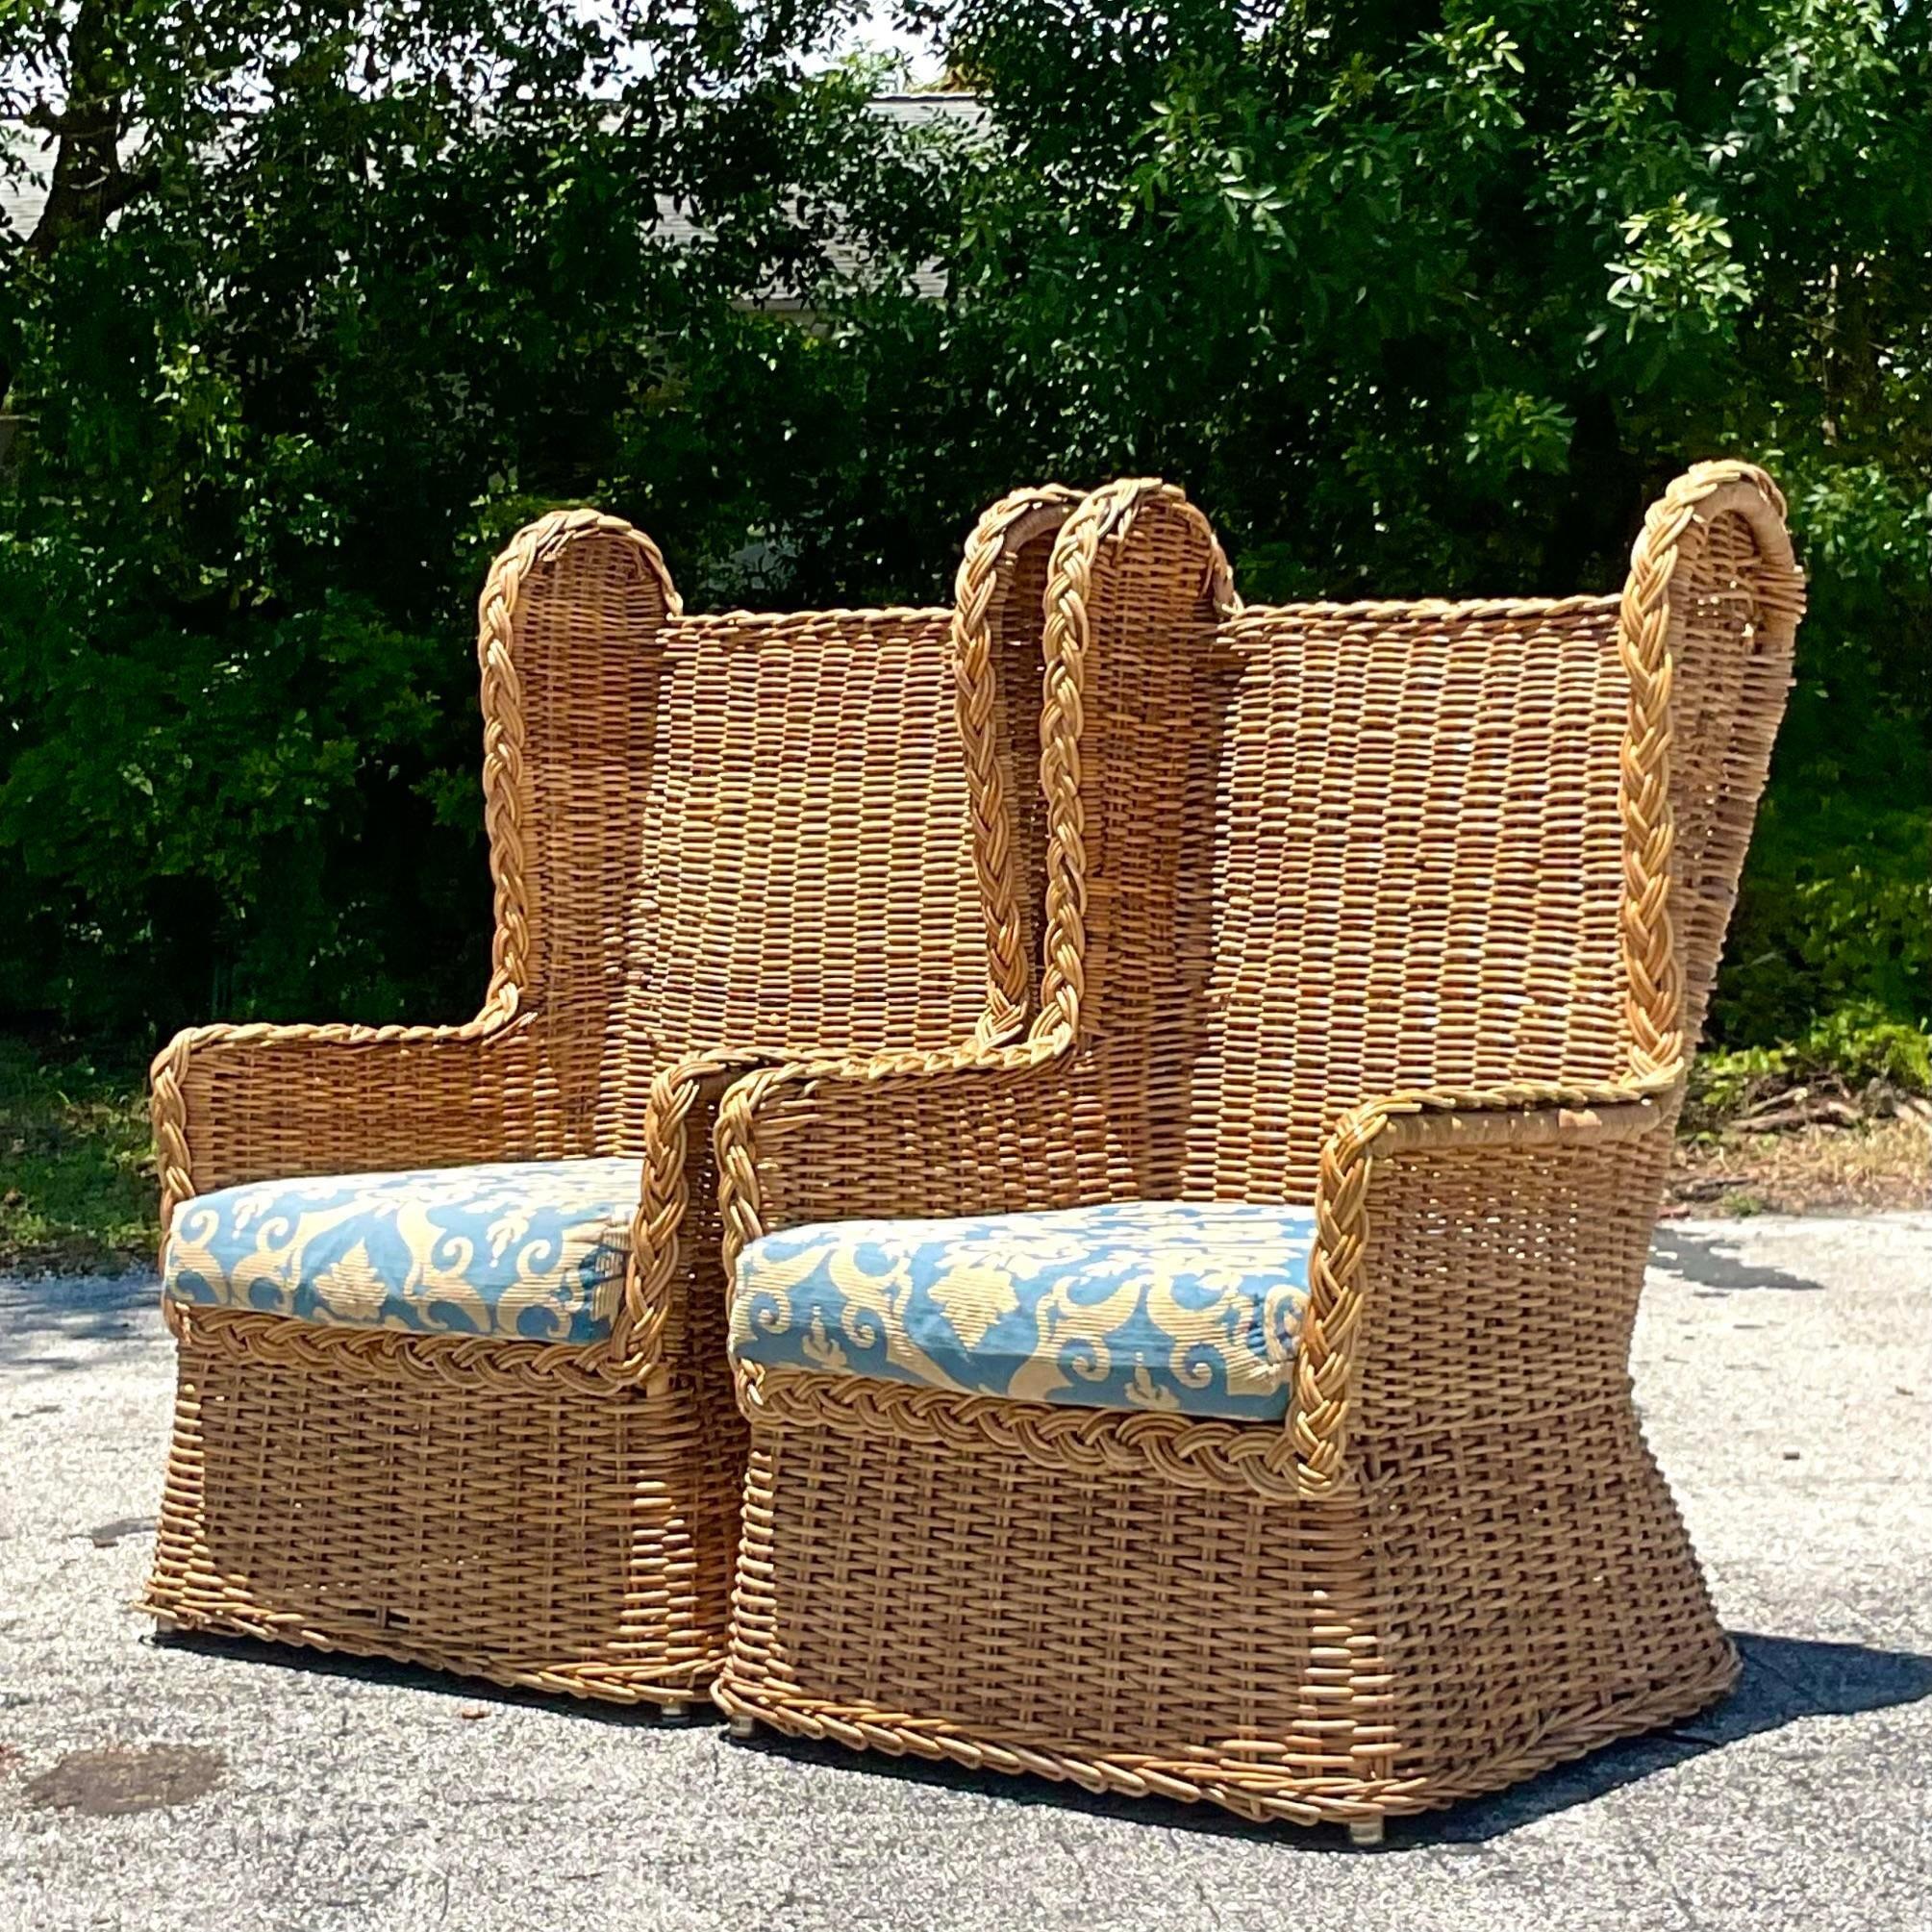 A spectacular pair of vintage Coastal Wingback chairs. Chic thick woven rattan in the iconic shape. Gorgeous braided rattan trim. Acquired from a Palm Beach estate.